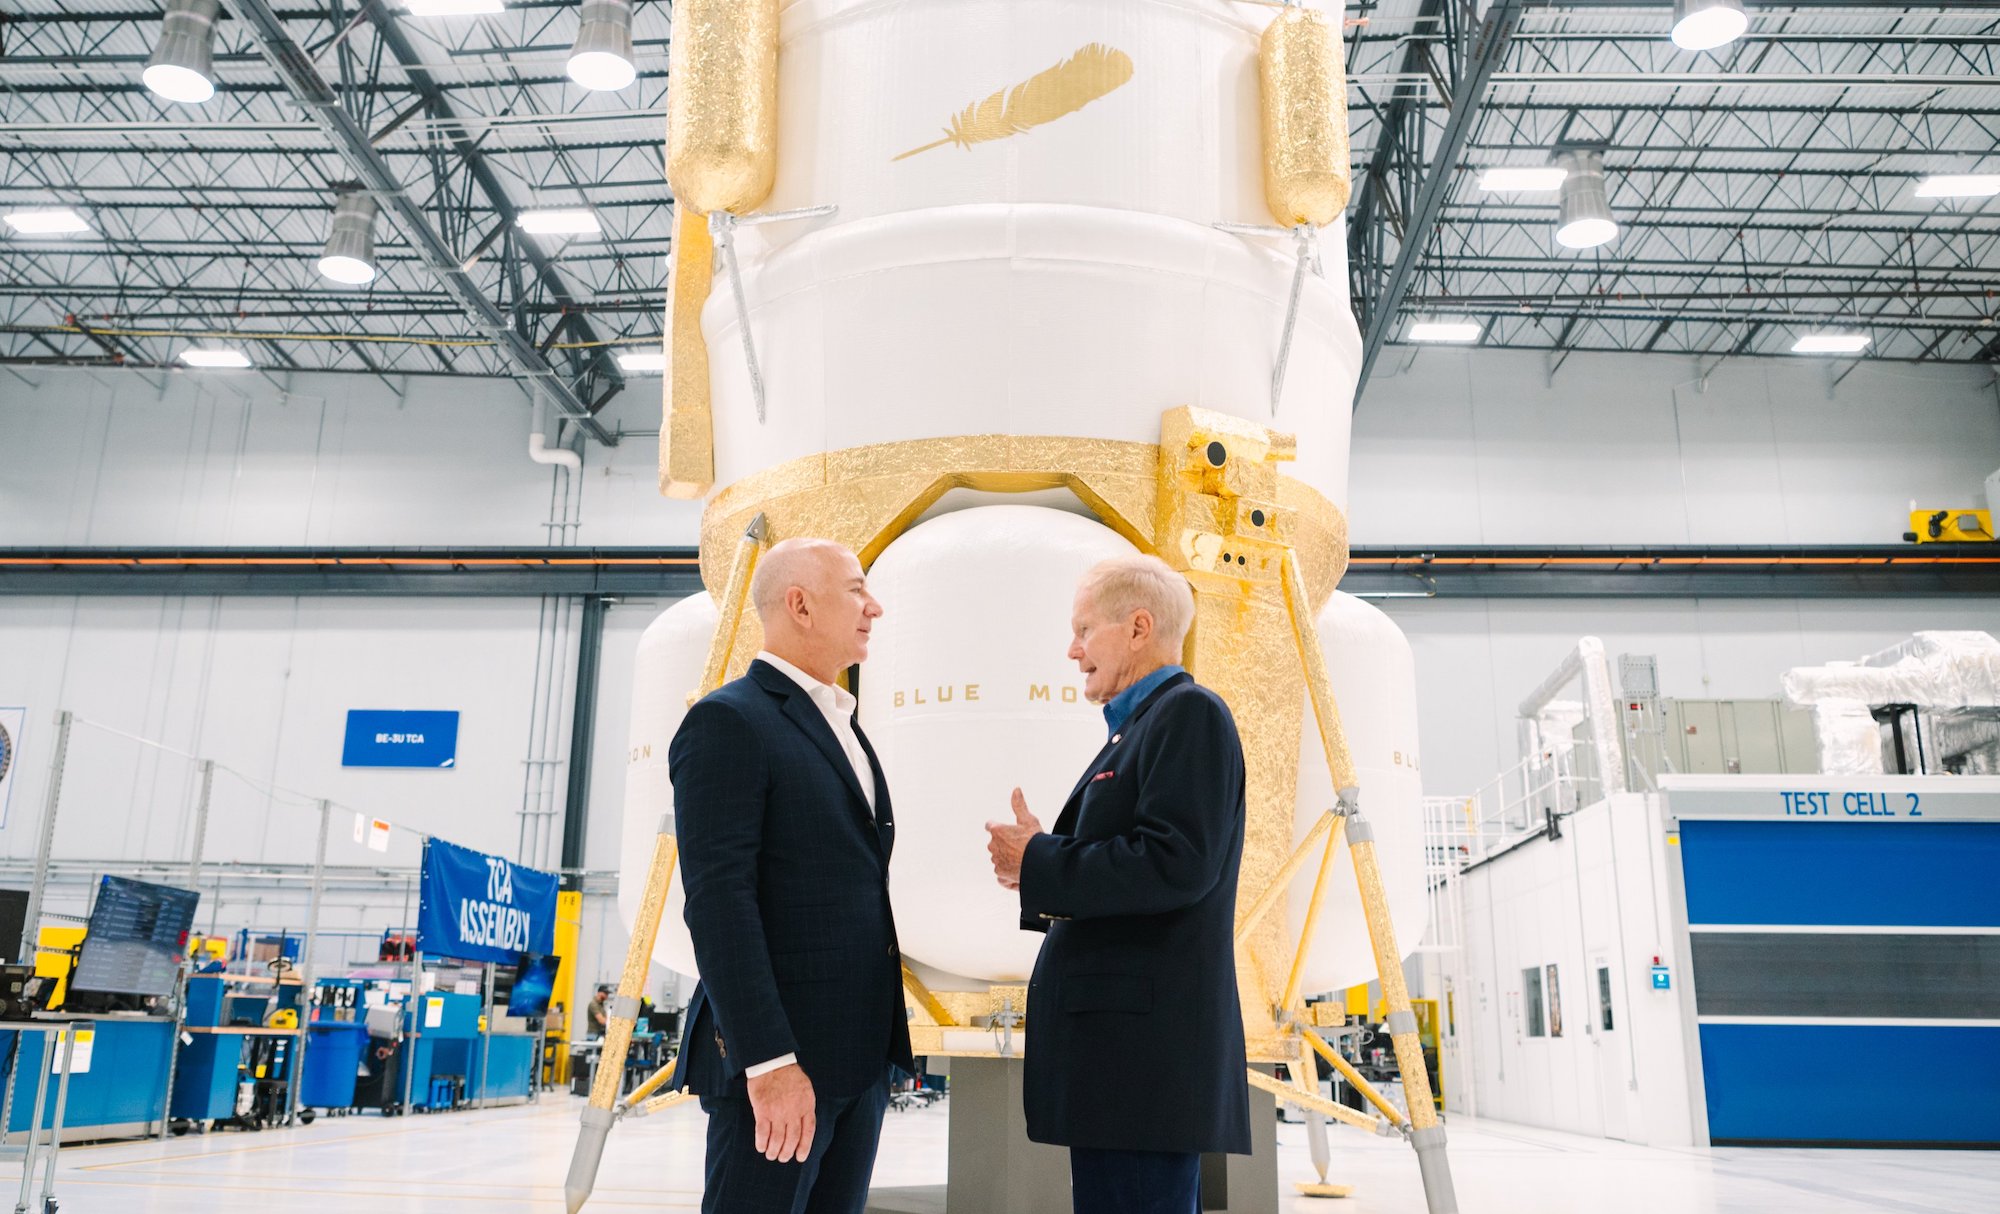 Blue Origin founder Jeff Bezos with NASA boss Bill Nelson in front of a mock-up of the Blue Moon lunar lander.